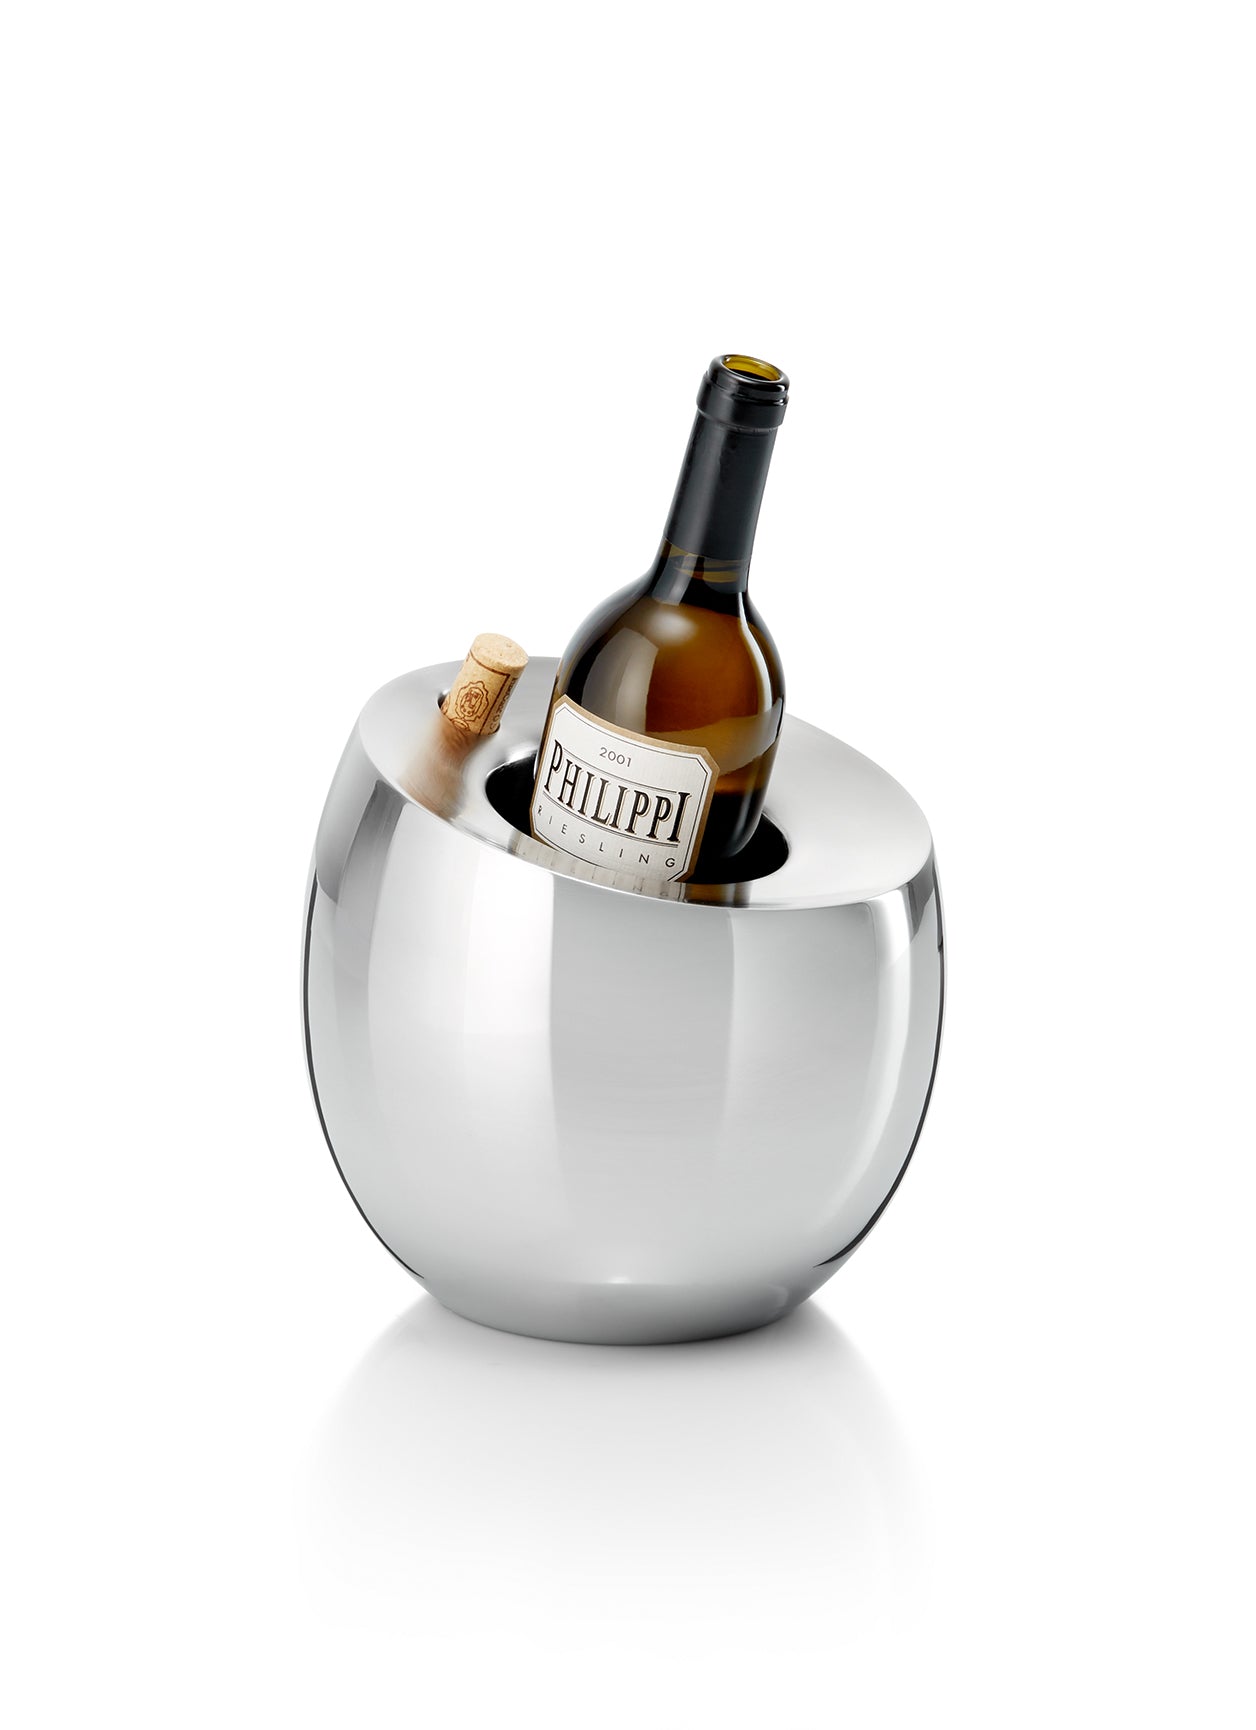 FROID wine cooler